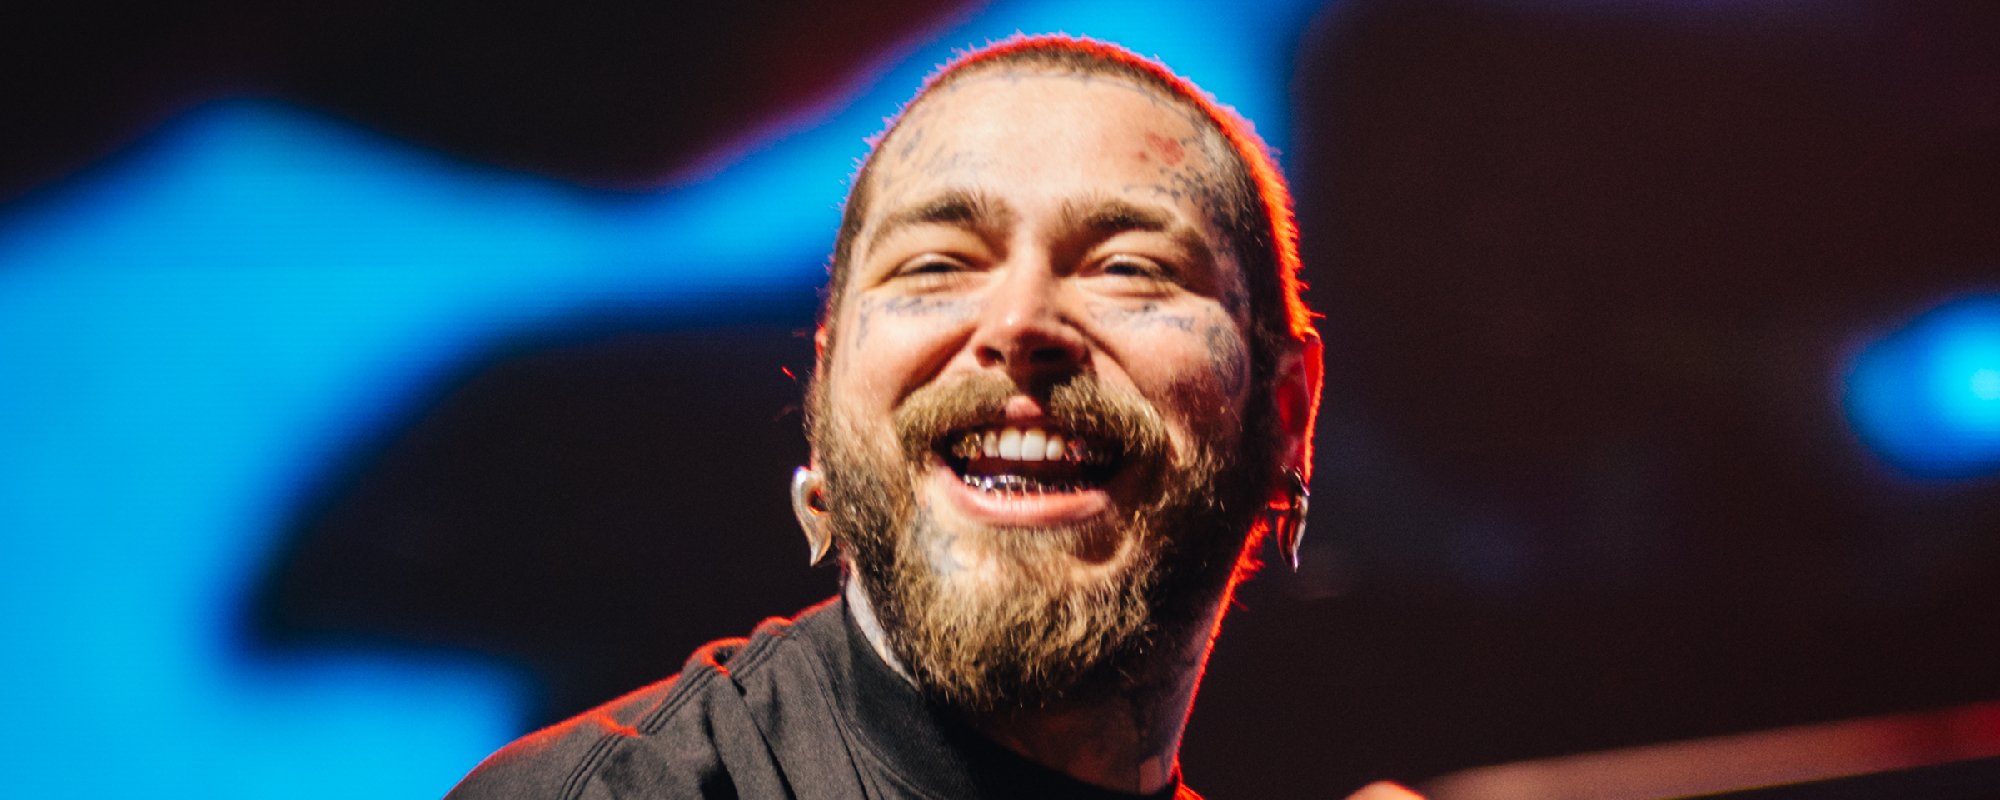 Post Malone Teases Country Music Entrance With Cover of Garth Brooks' "Friends in Low Places"